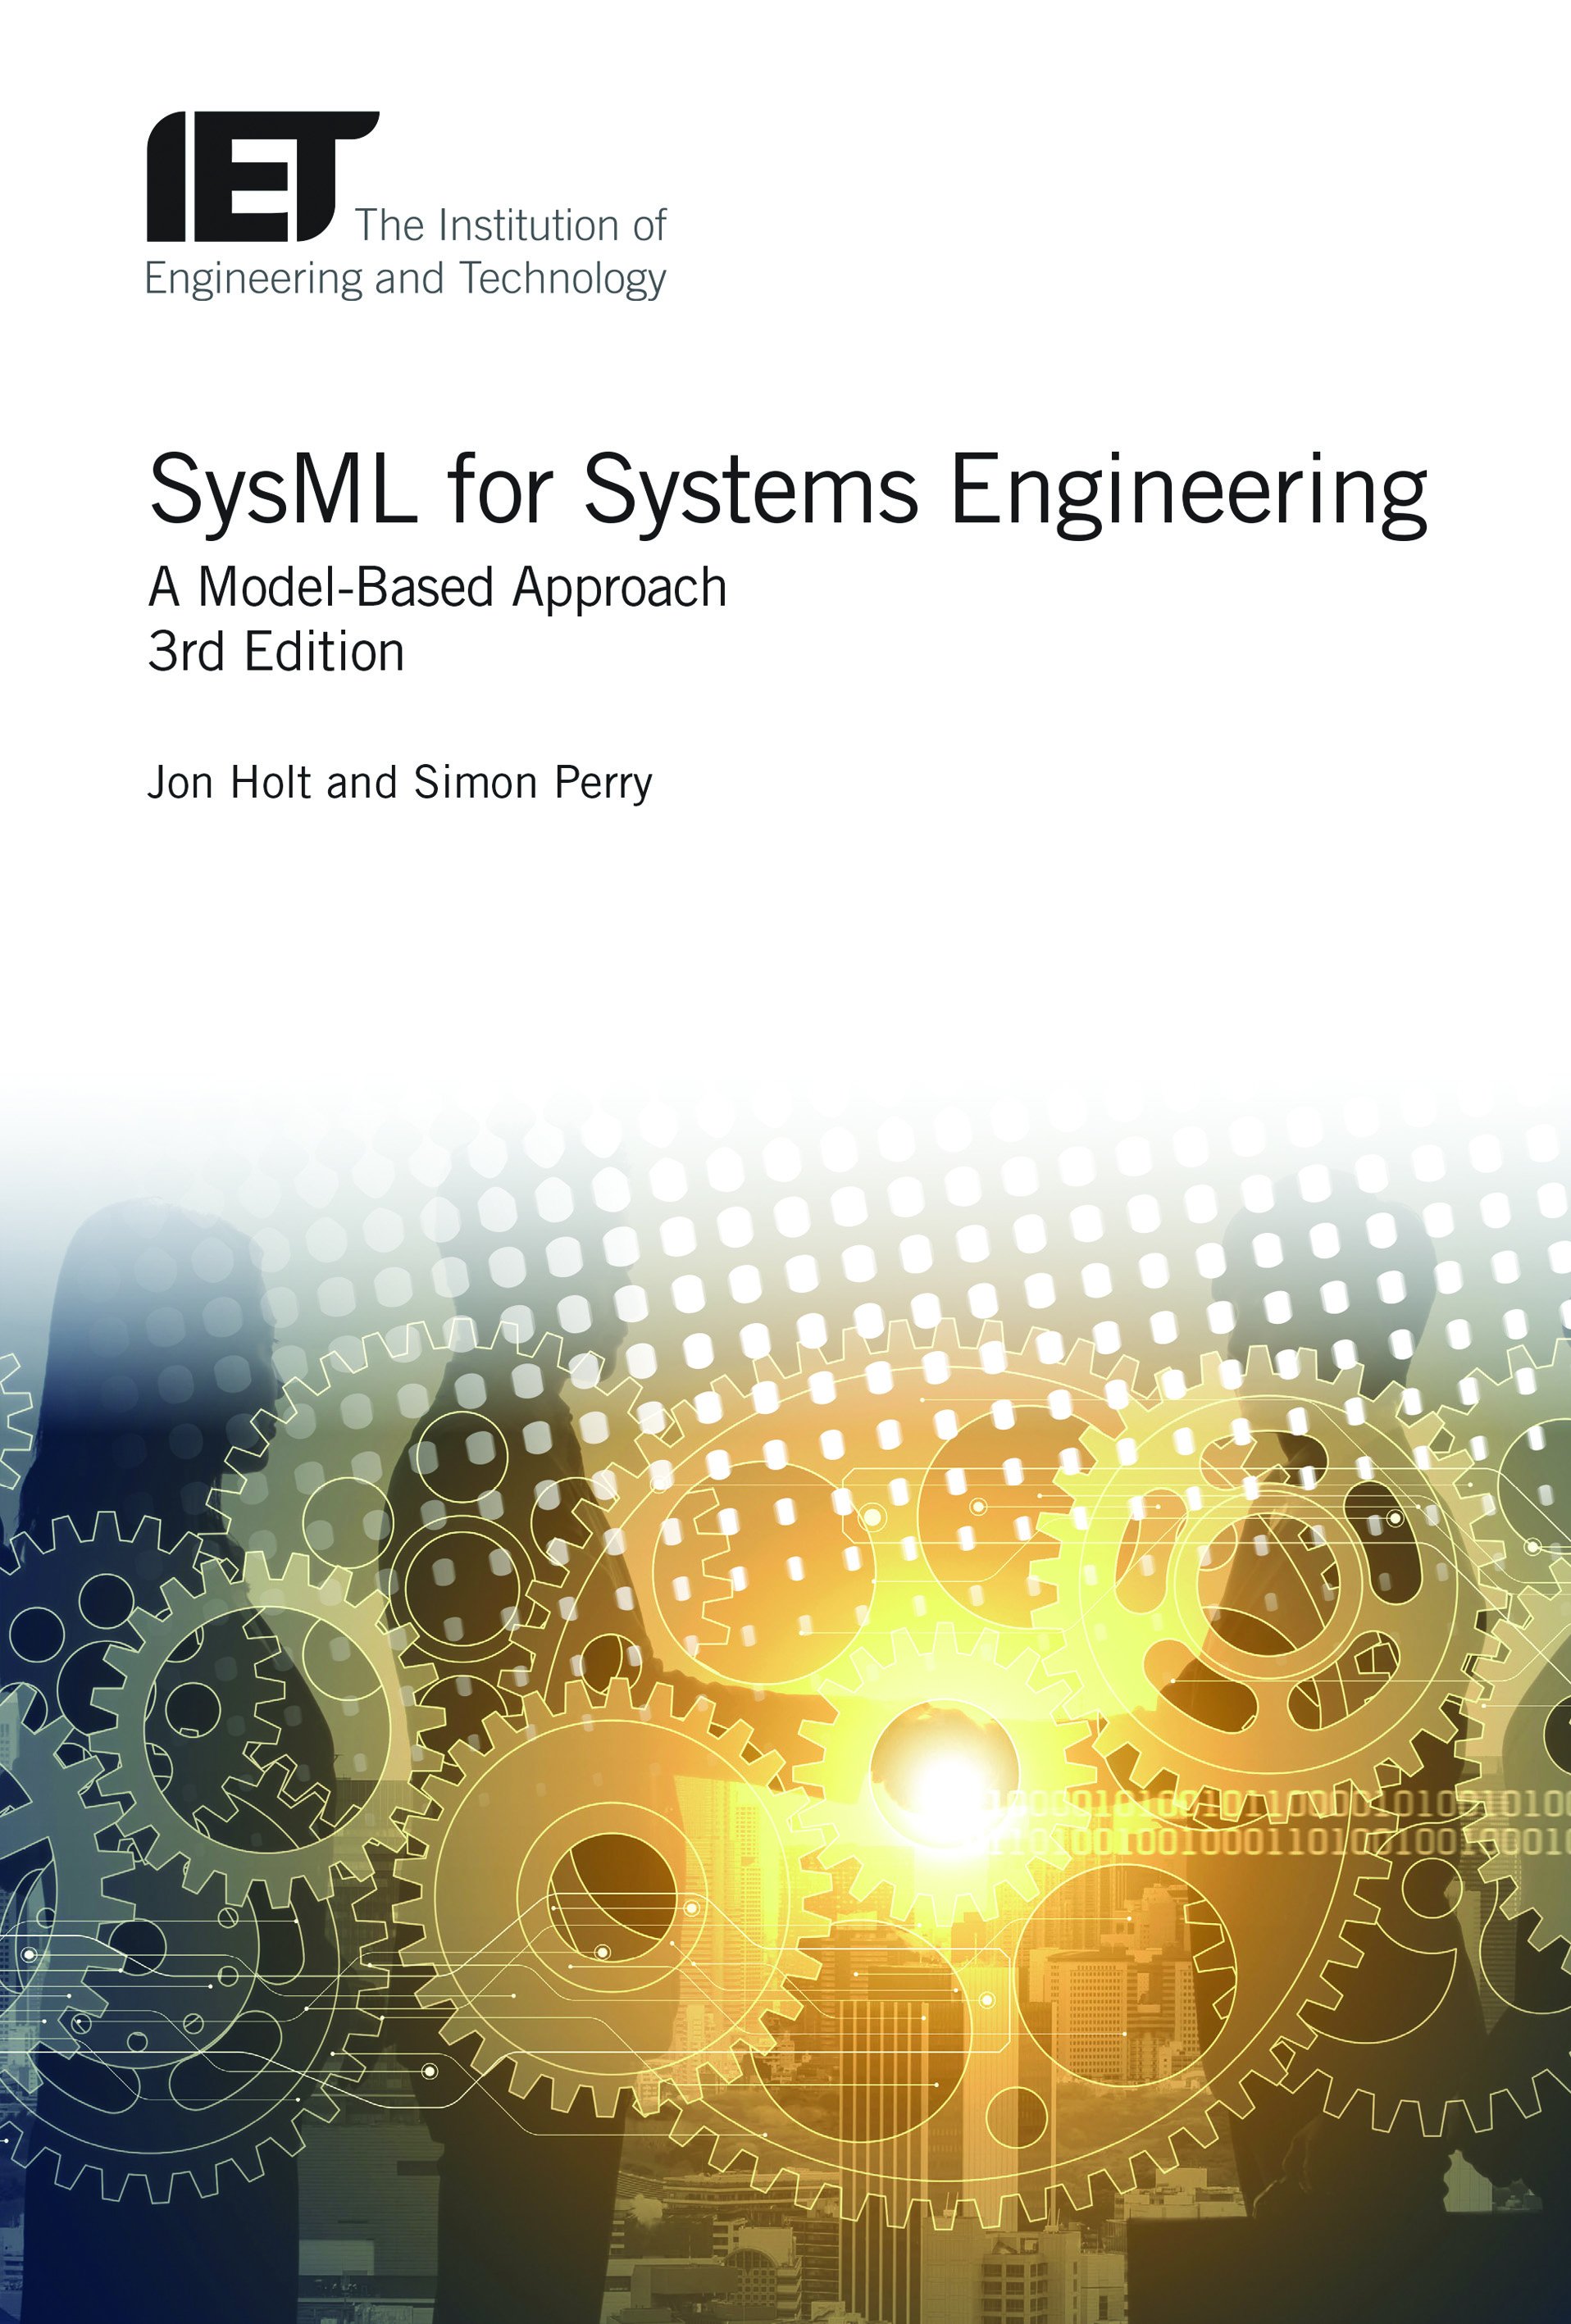 SysML for Systems Engineering, A model-based approach, 3rd Edition